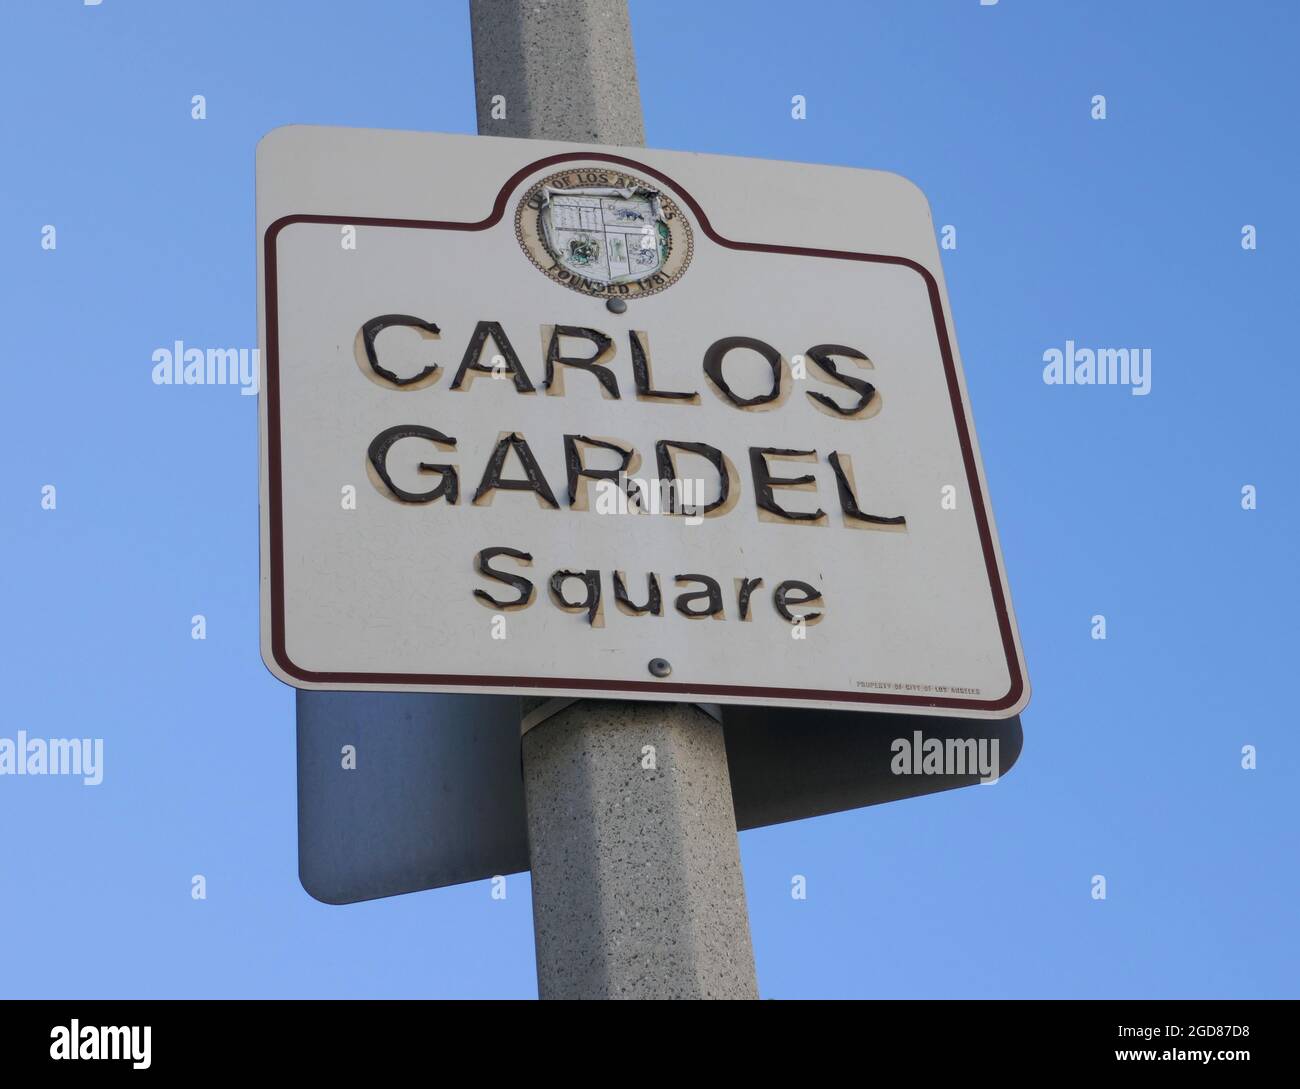 Los Angeles, California, USA 10th August 2021 A general view of atmosphere of Carlos Gardel Square Sign on August 10, 2021 in Los Angeles, California, USA. Photo by Barry King/Alamy Stock Photo Stock Photo